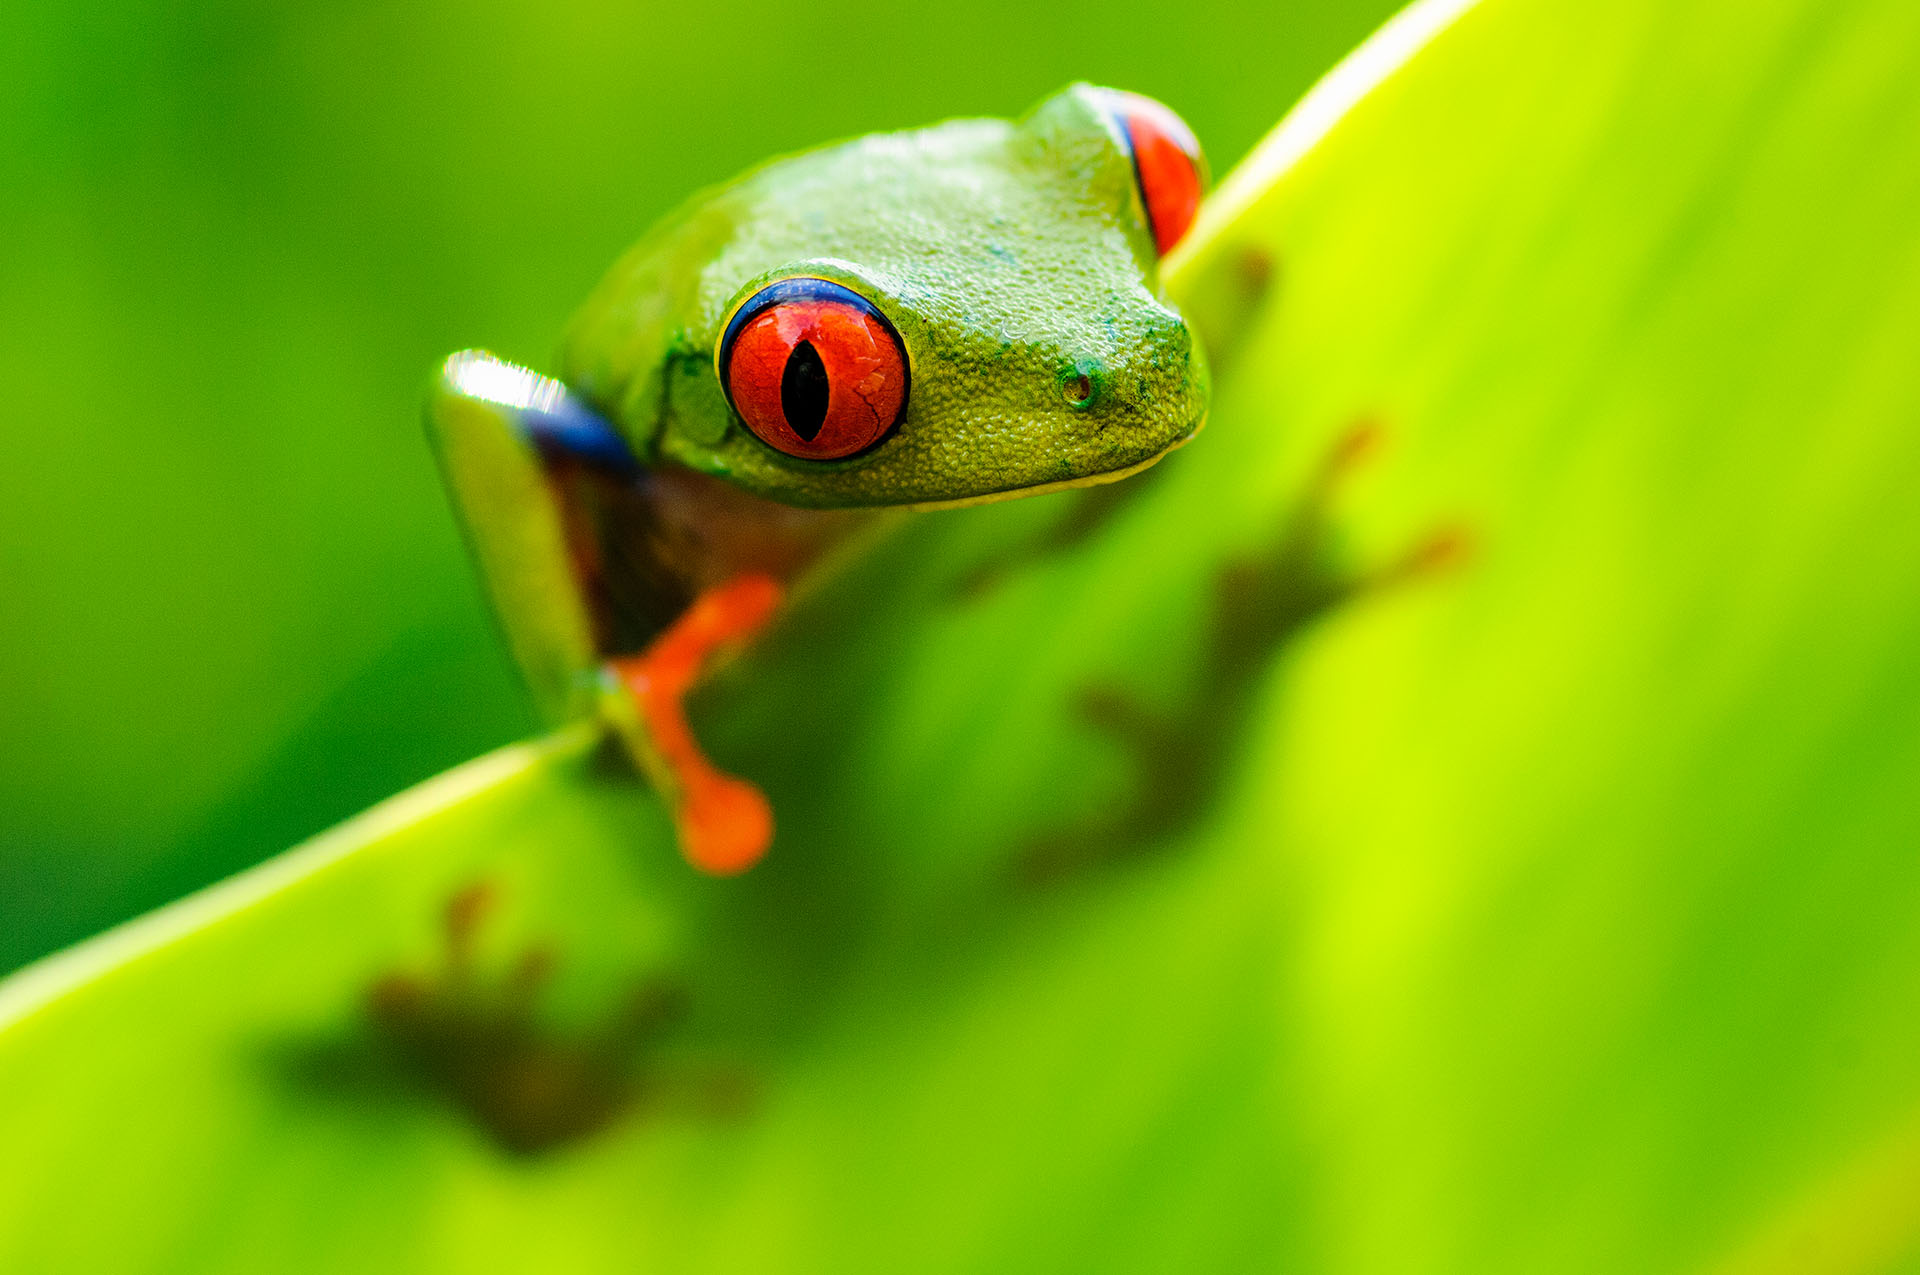 Red-eyed tree frog on banana leaf, looking around.